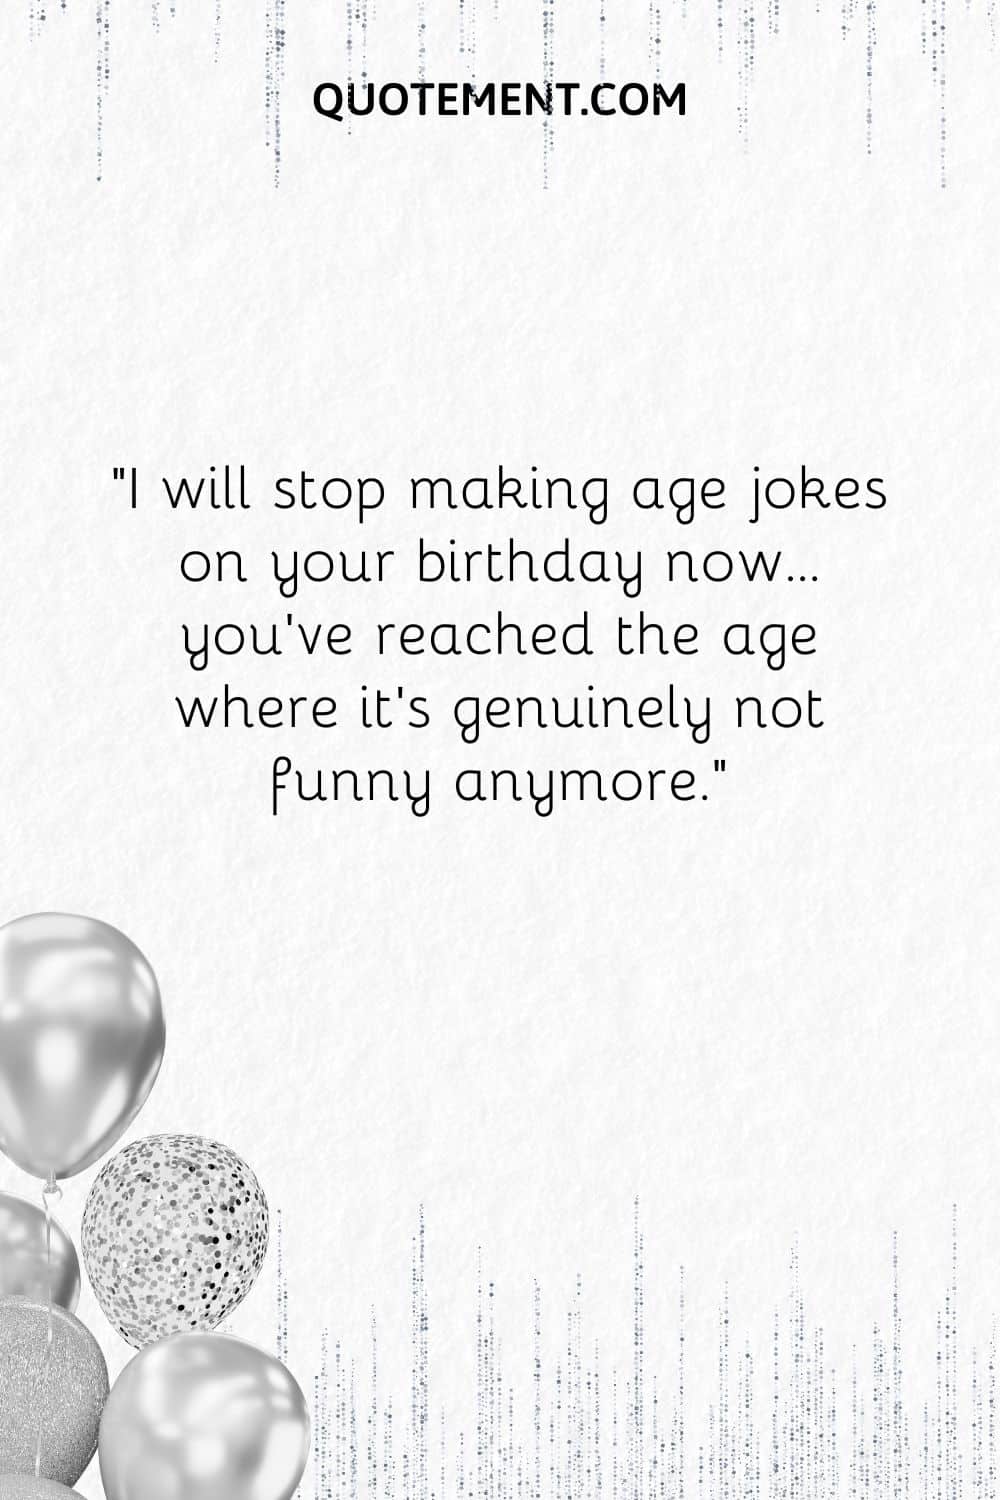 I will stop making age jokes on your birthday now